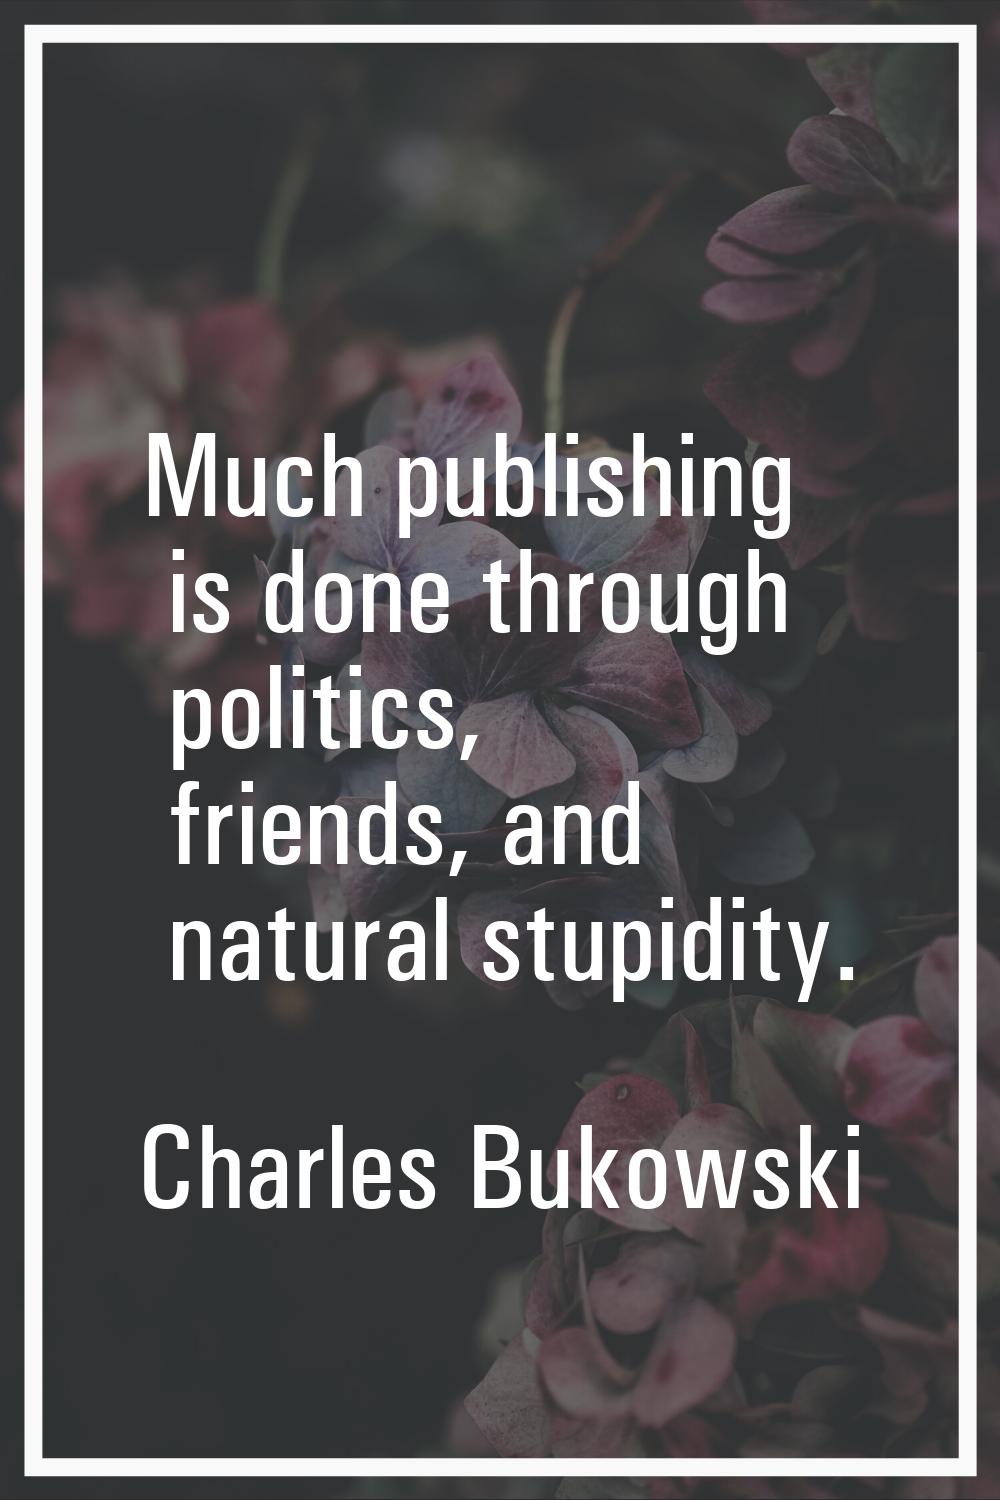 Much publishing is done through politics, friends, and natural stupidity.